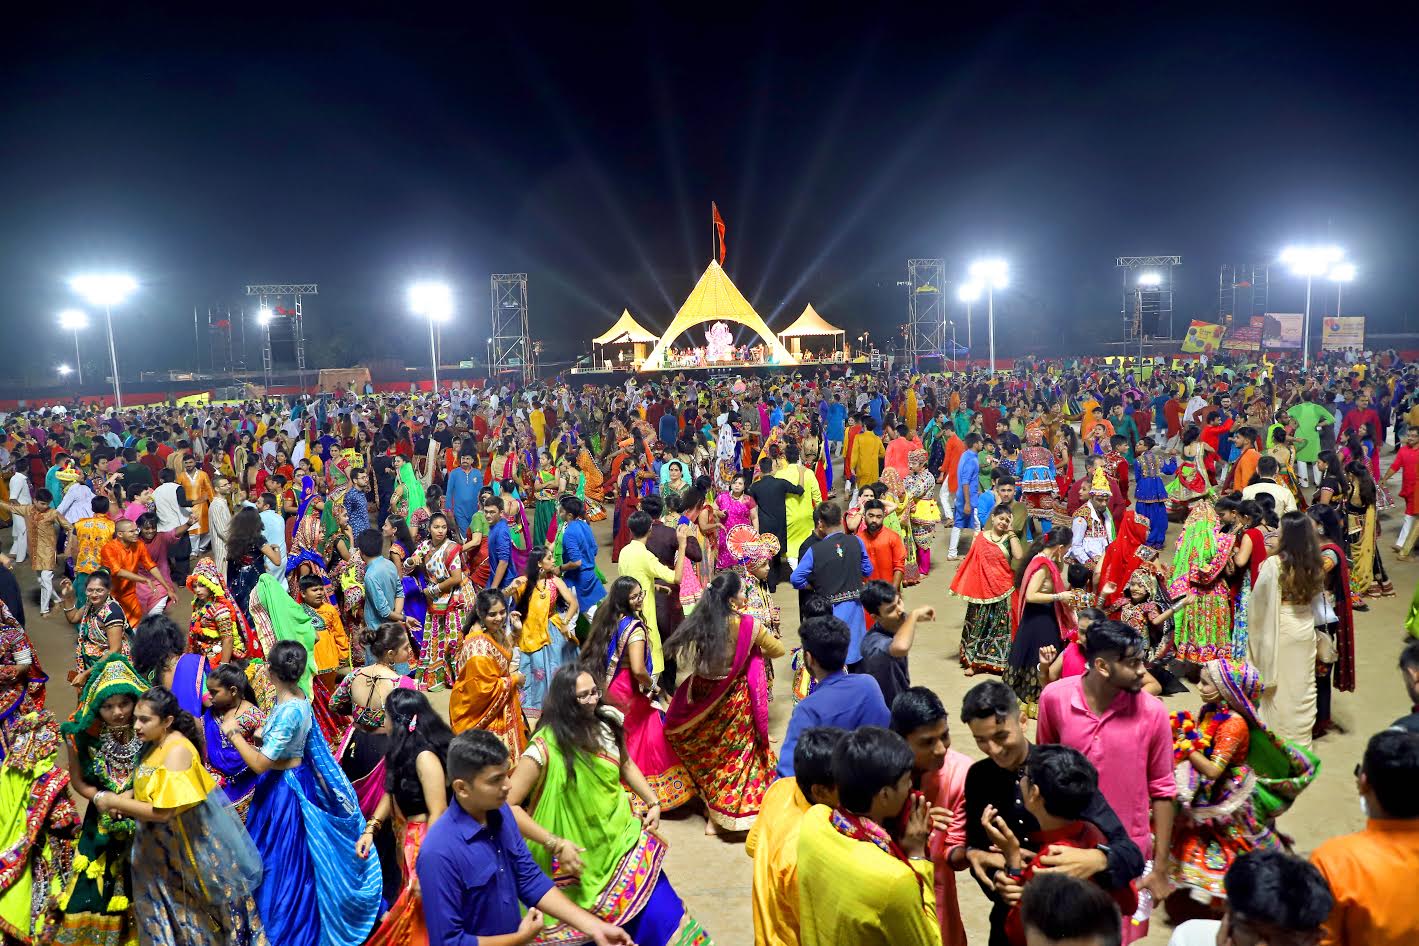 Garba of Gujarat likely to be declared as Intangible Cultural Heritage by UNESCO